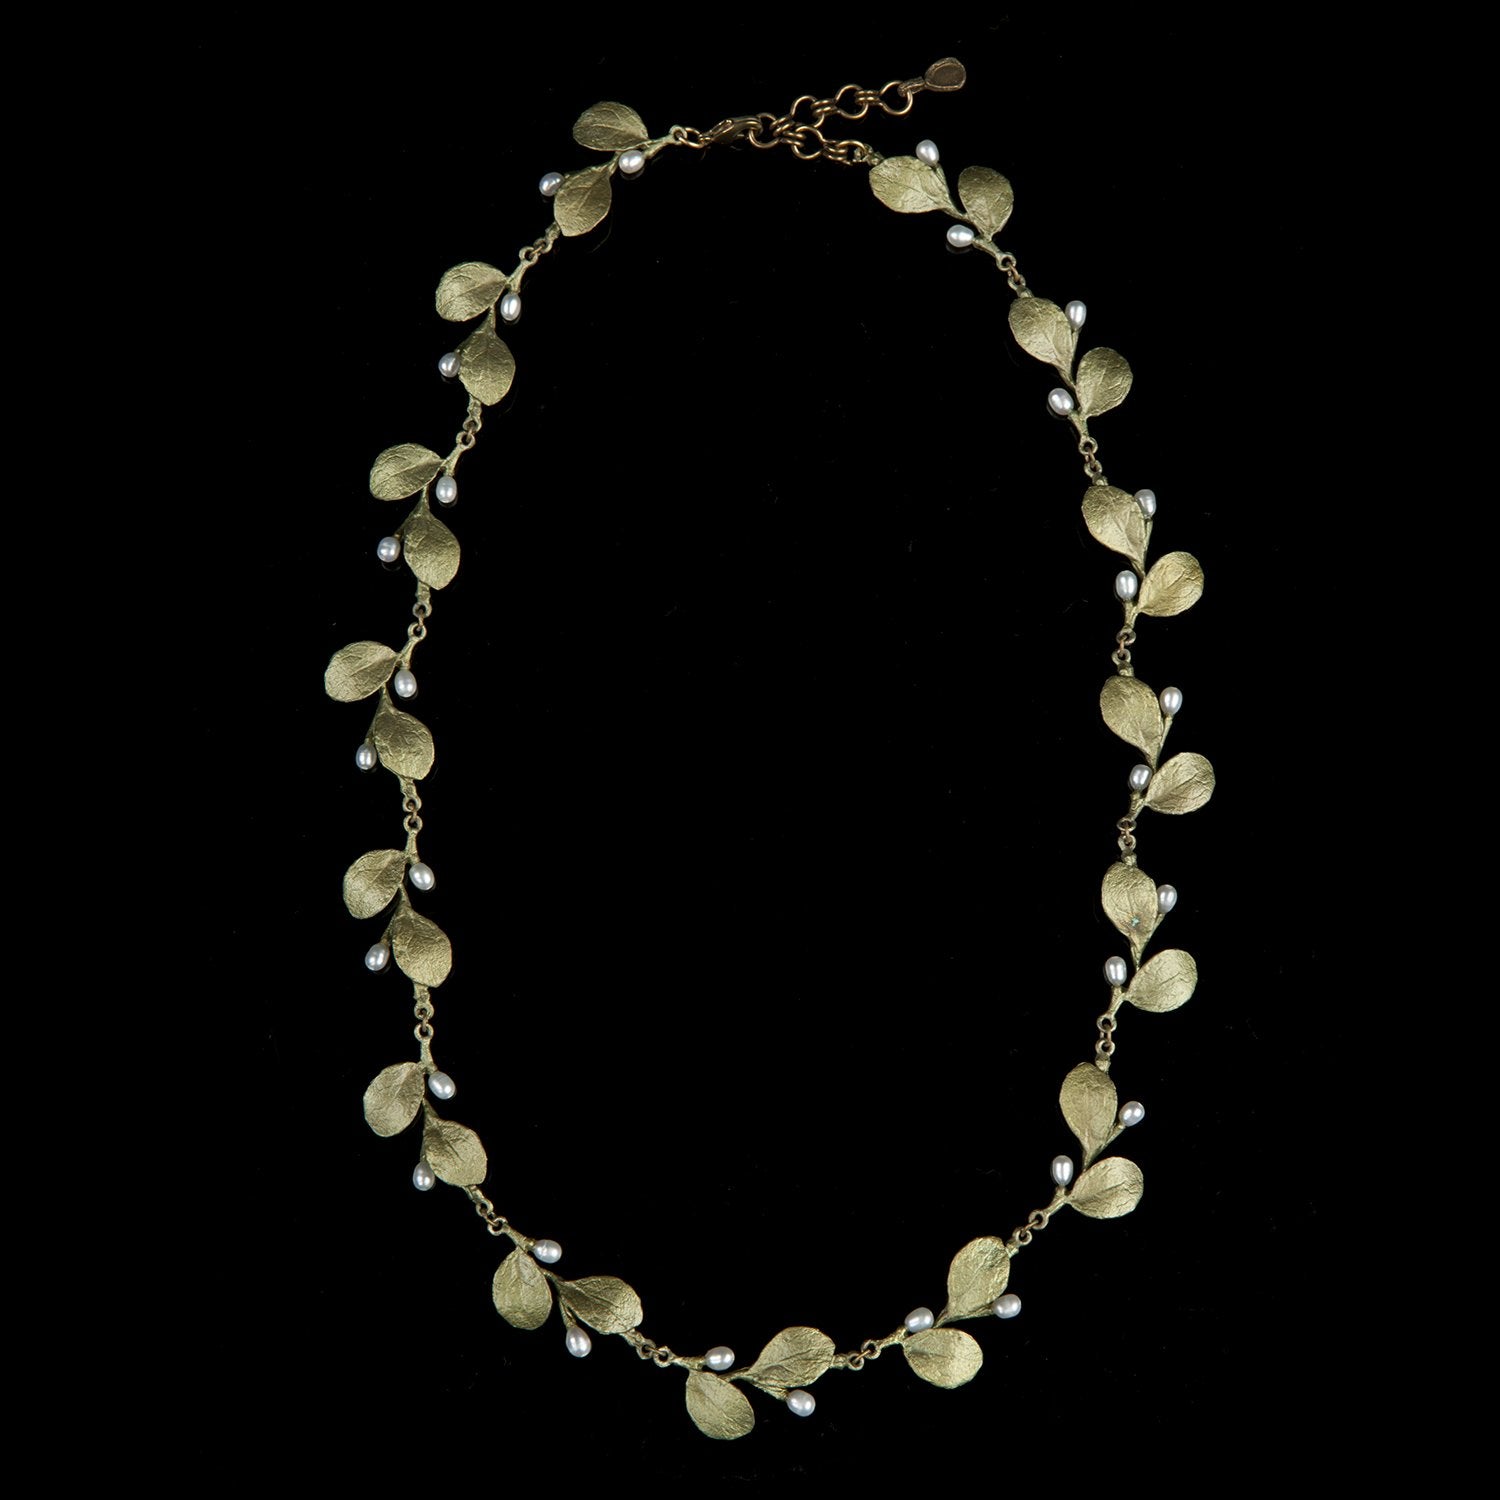 Irish Thorn Necklace - Tailored Leaves